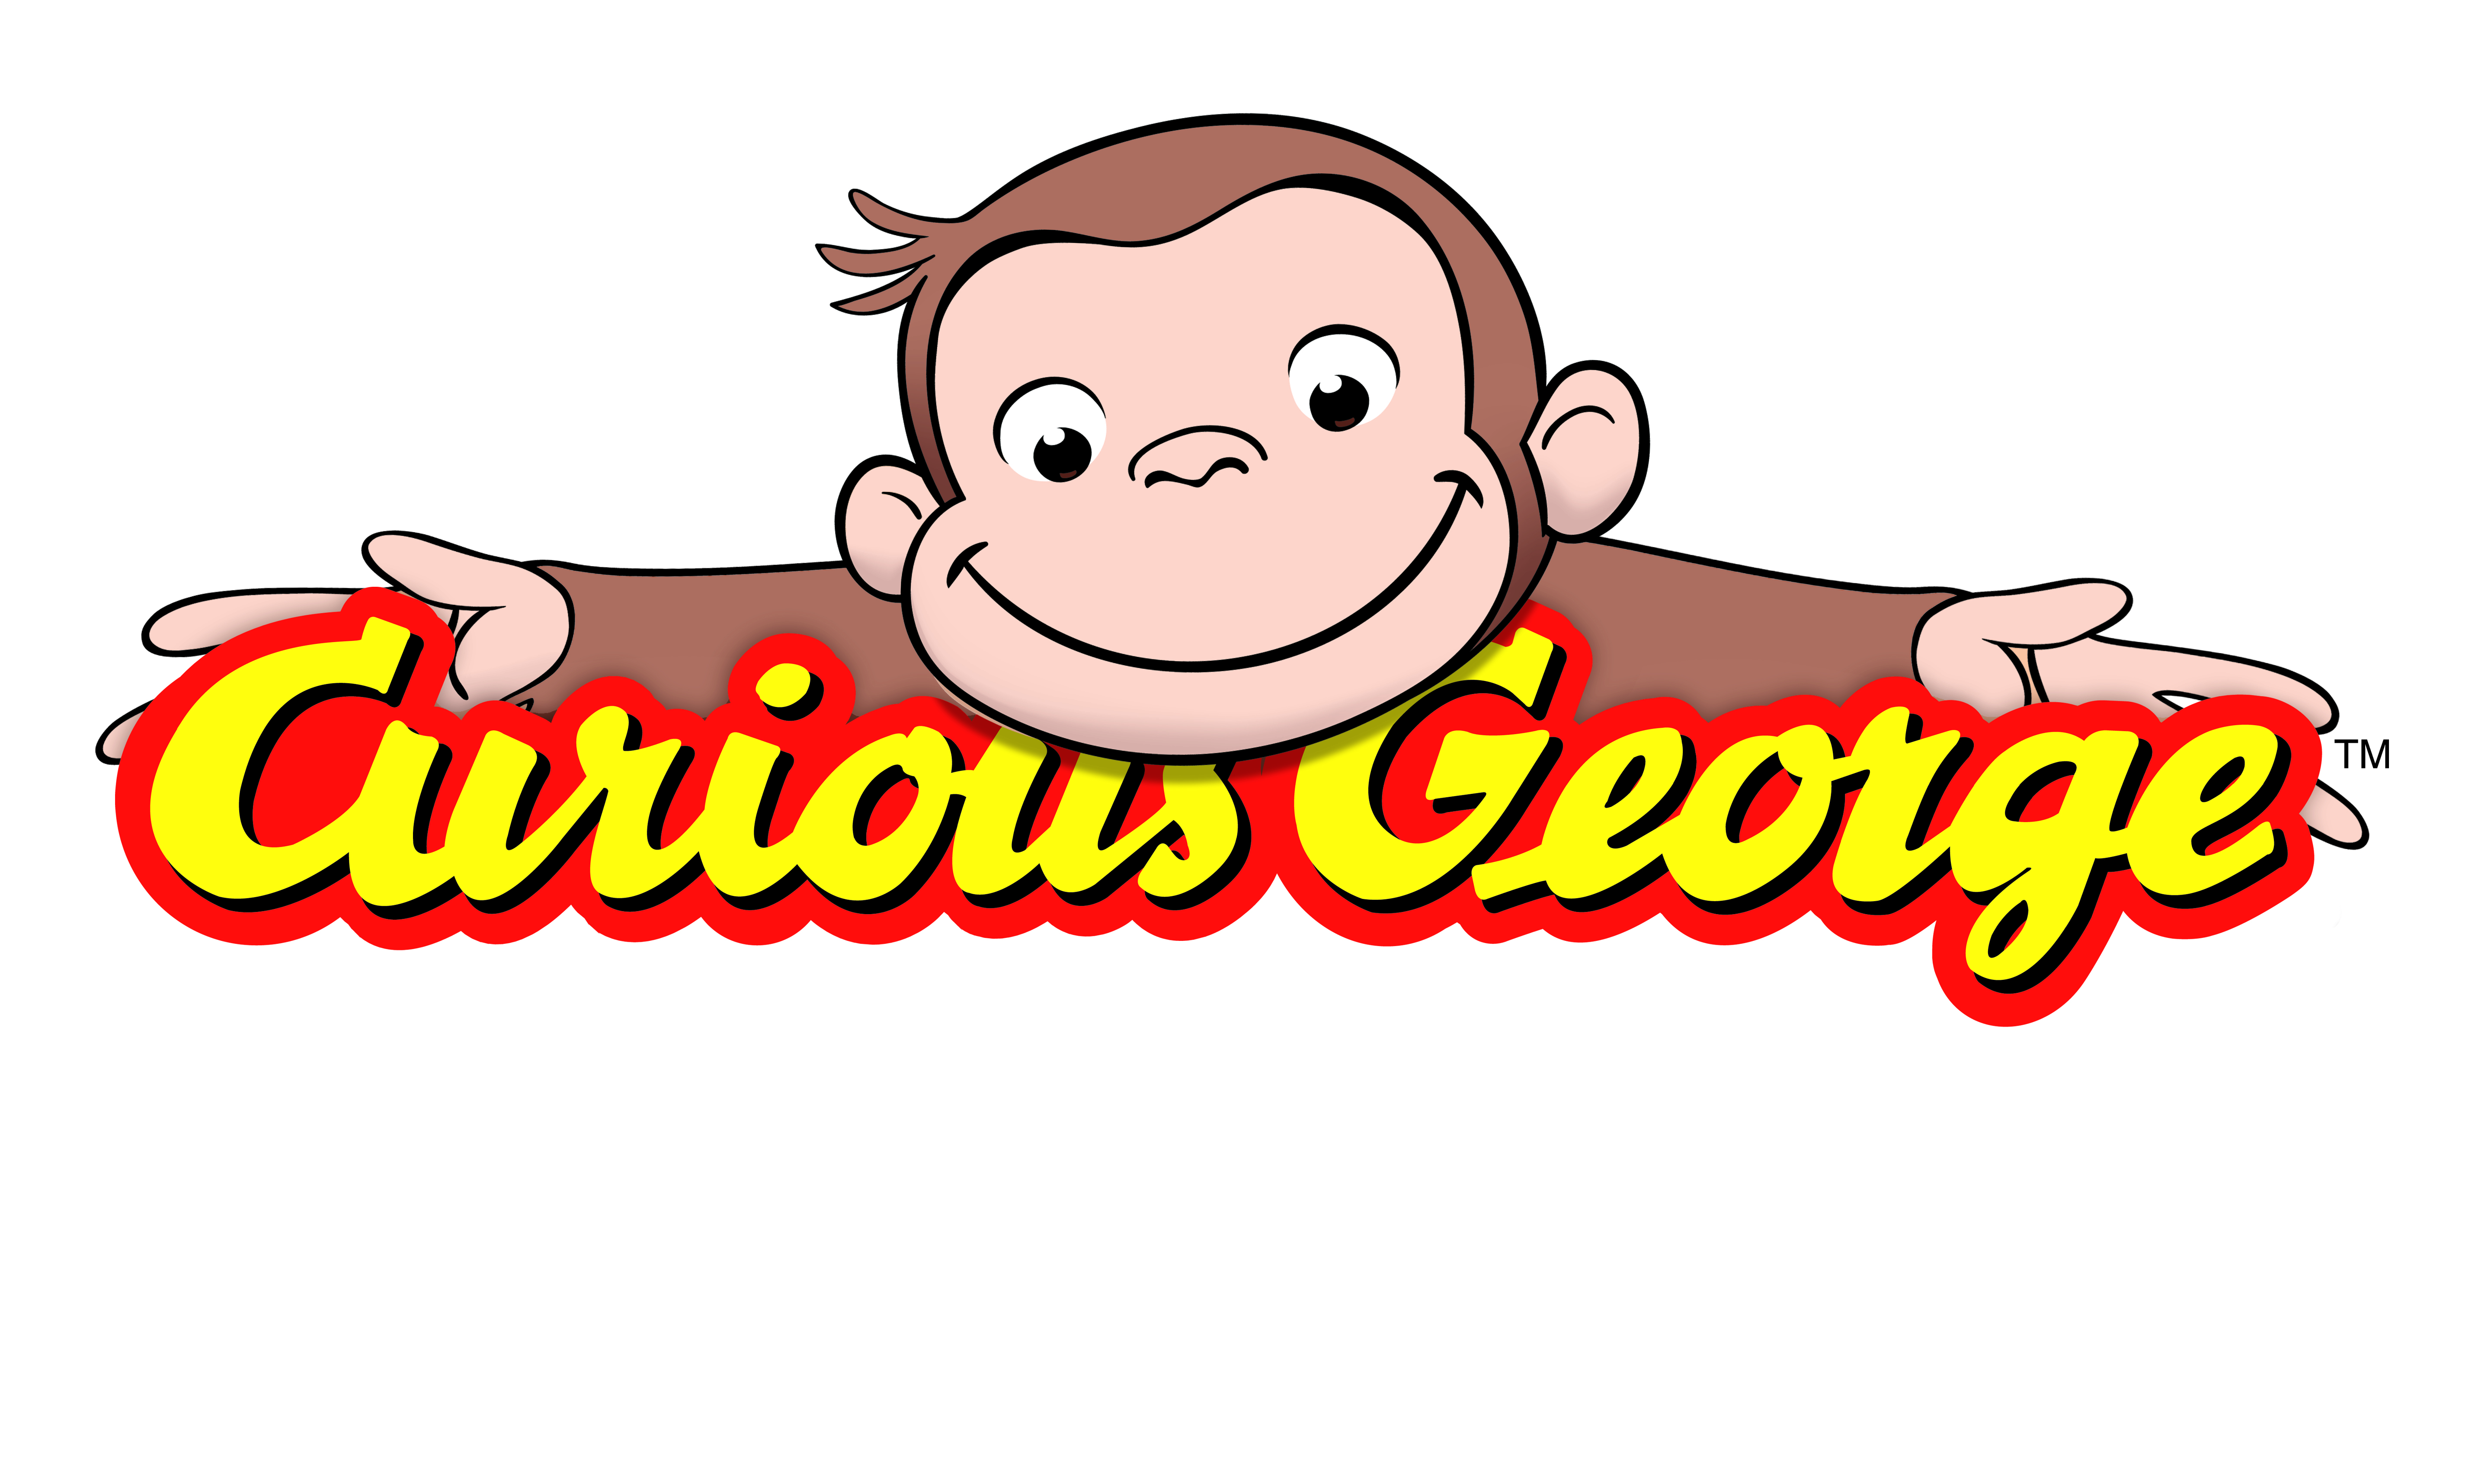 Curious George on Pinterest | 22 Pins